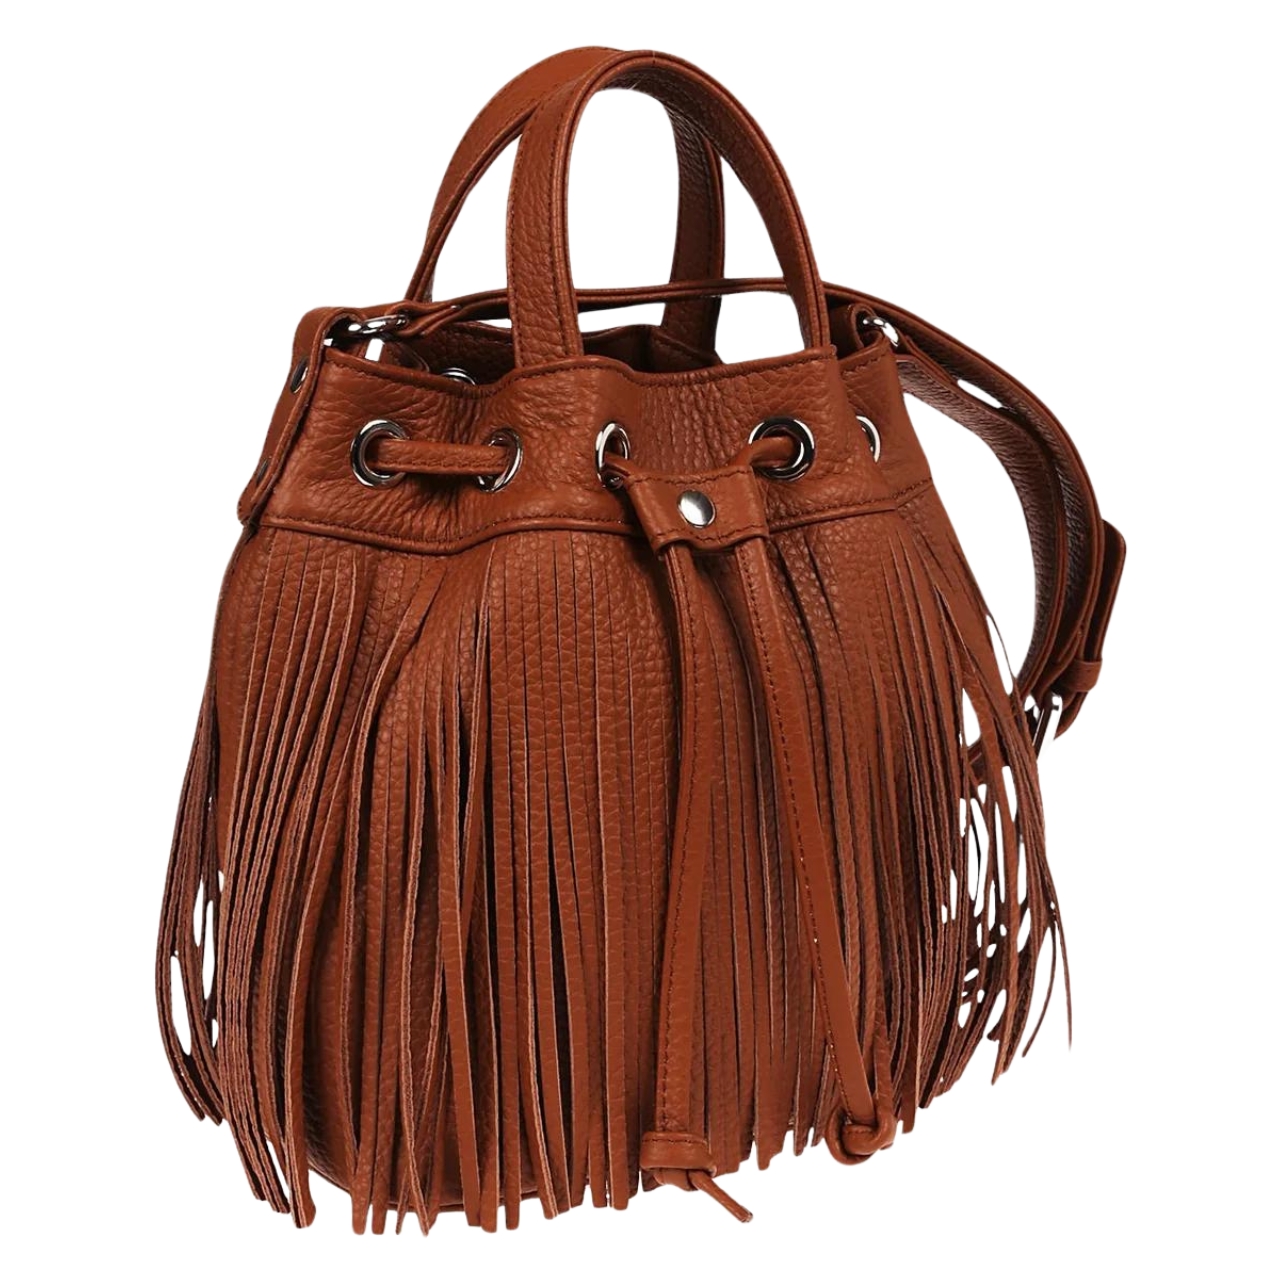 Eleventy brown leather bucket bag with fringes